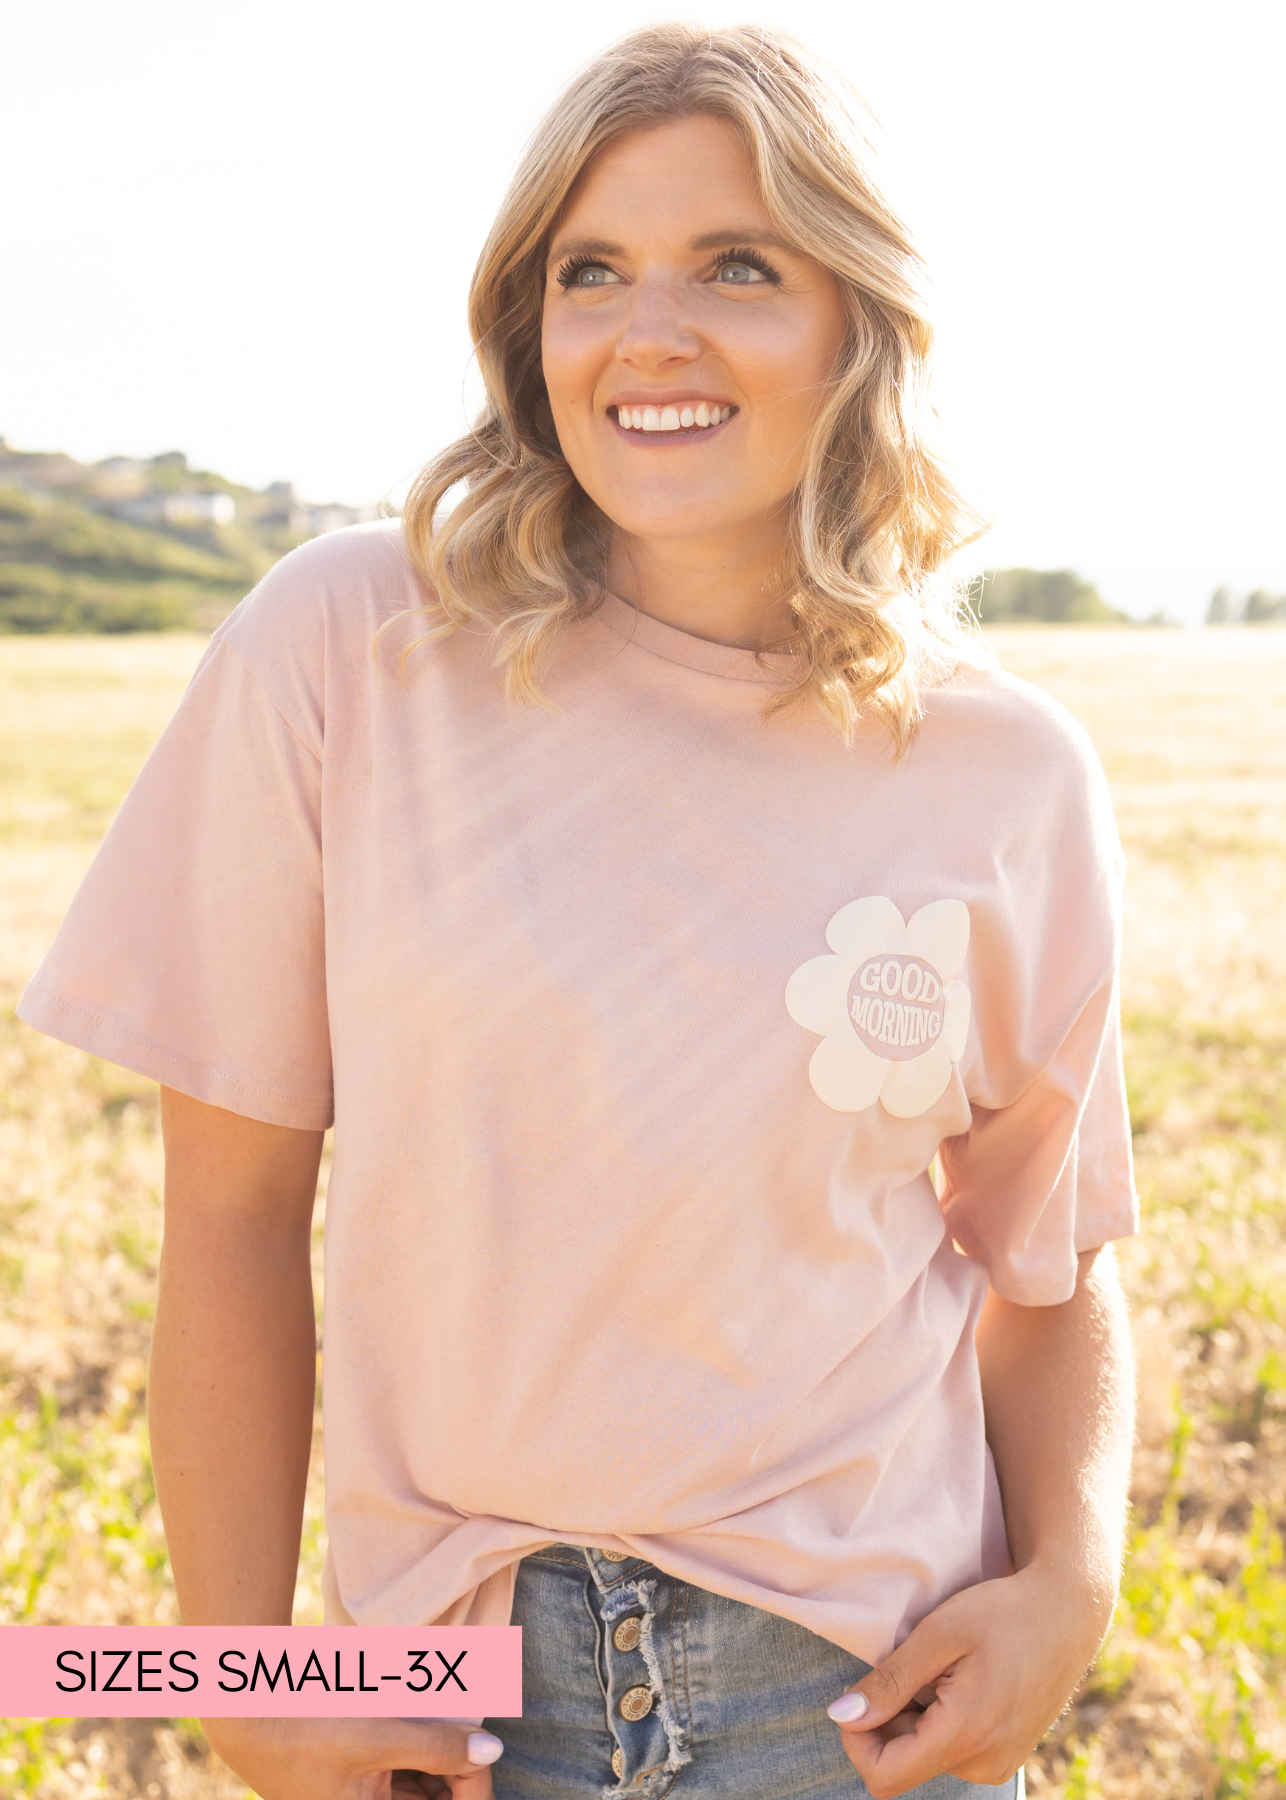 Short sleeve pink top with white daisy